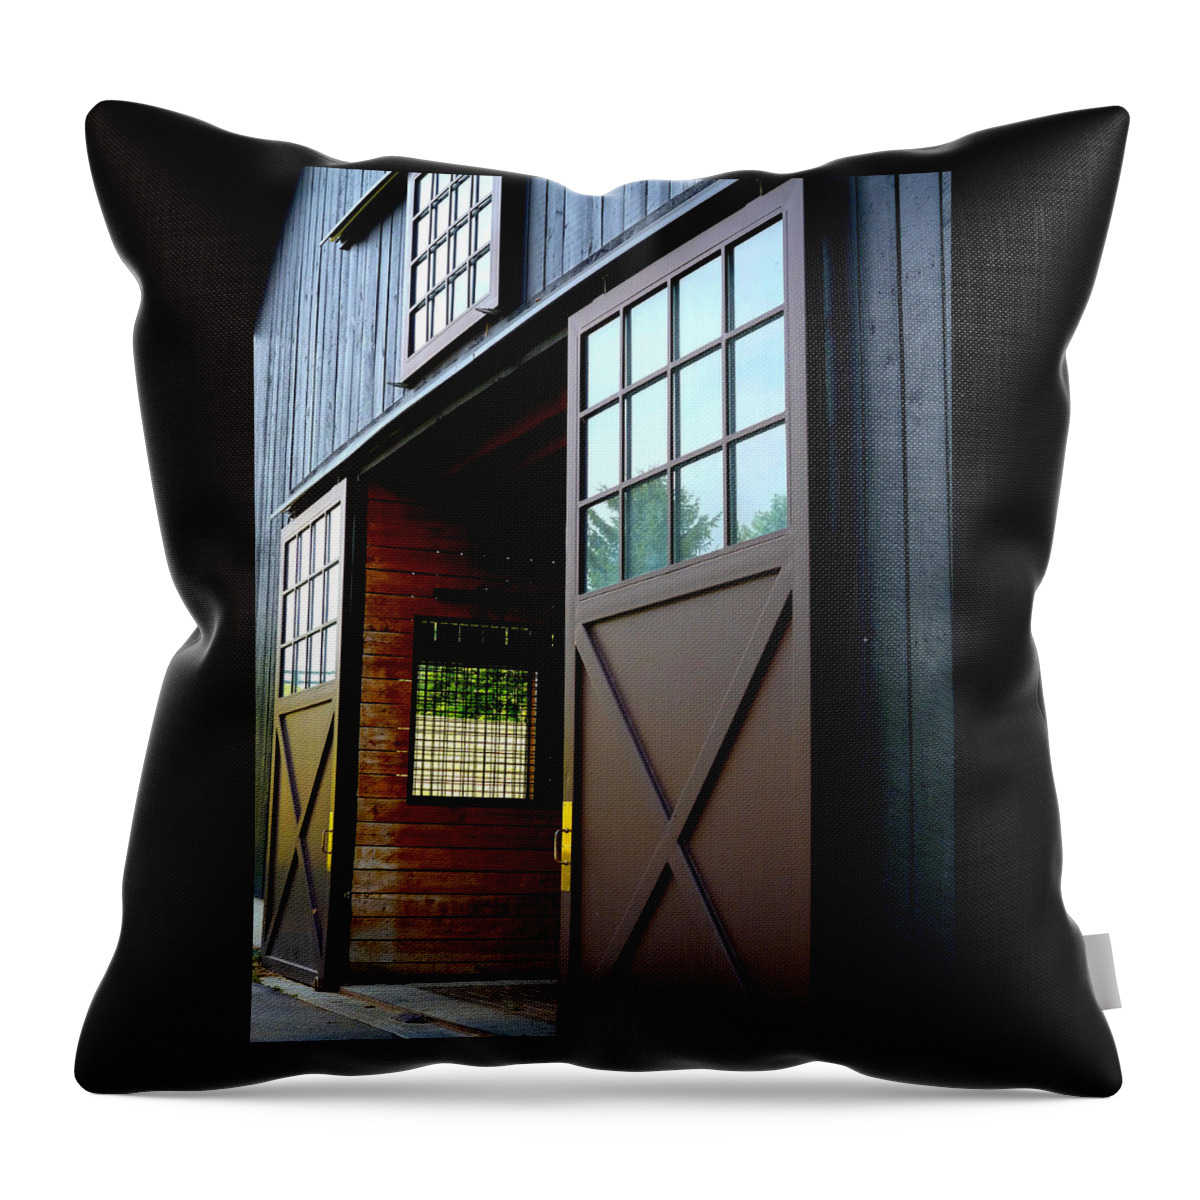 Horse Barn Throw Pillow featuring the photograph Barn Door Perspective by Mike McBrayer